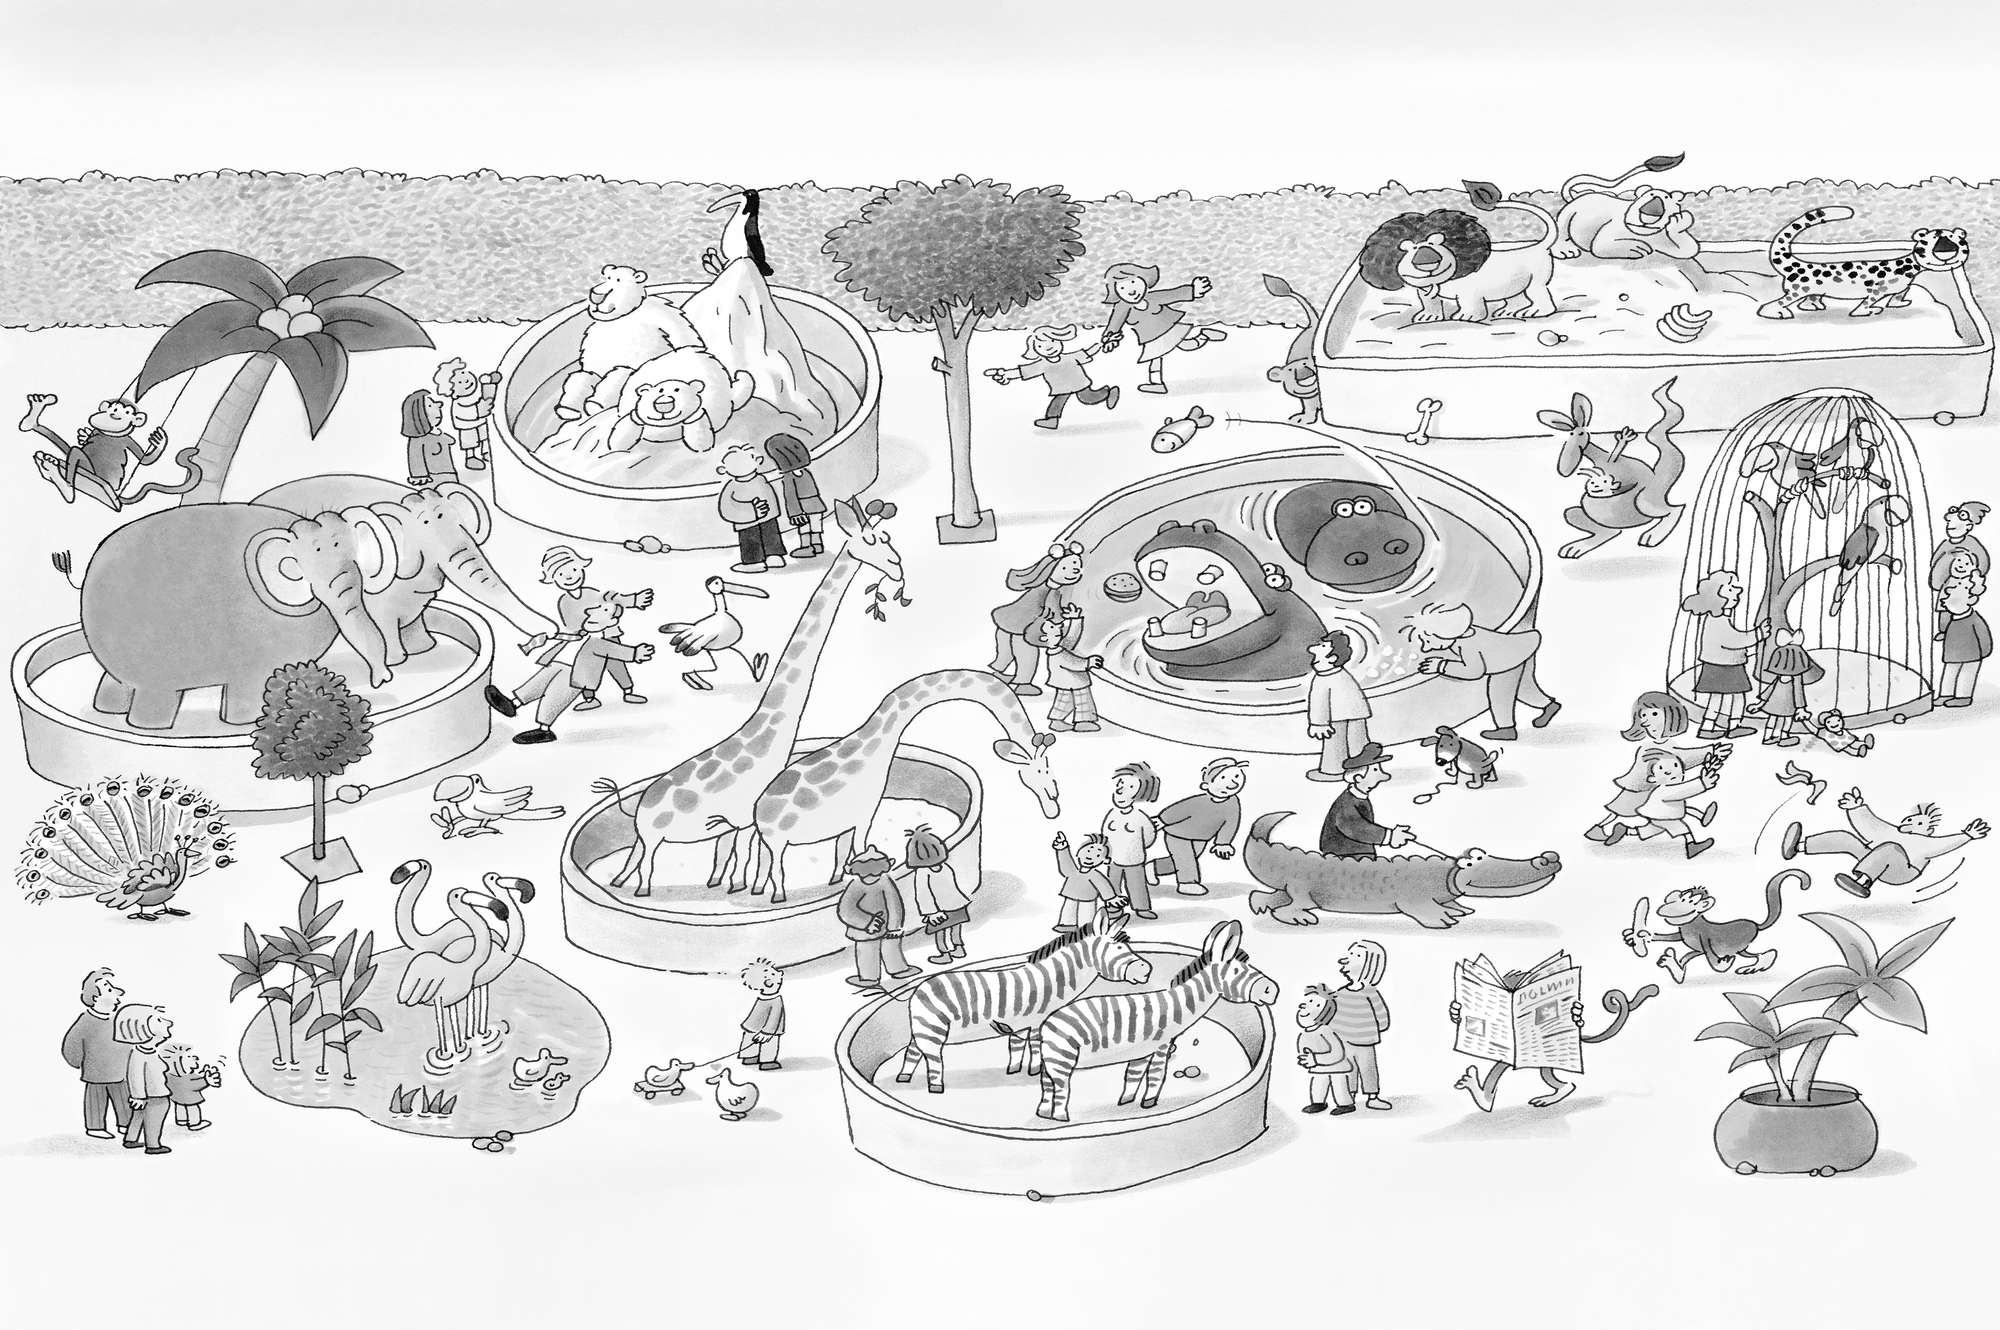             Children mural zoo drawing in black white on textured non-woven
        